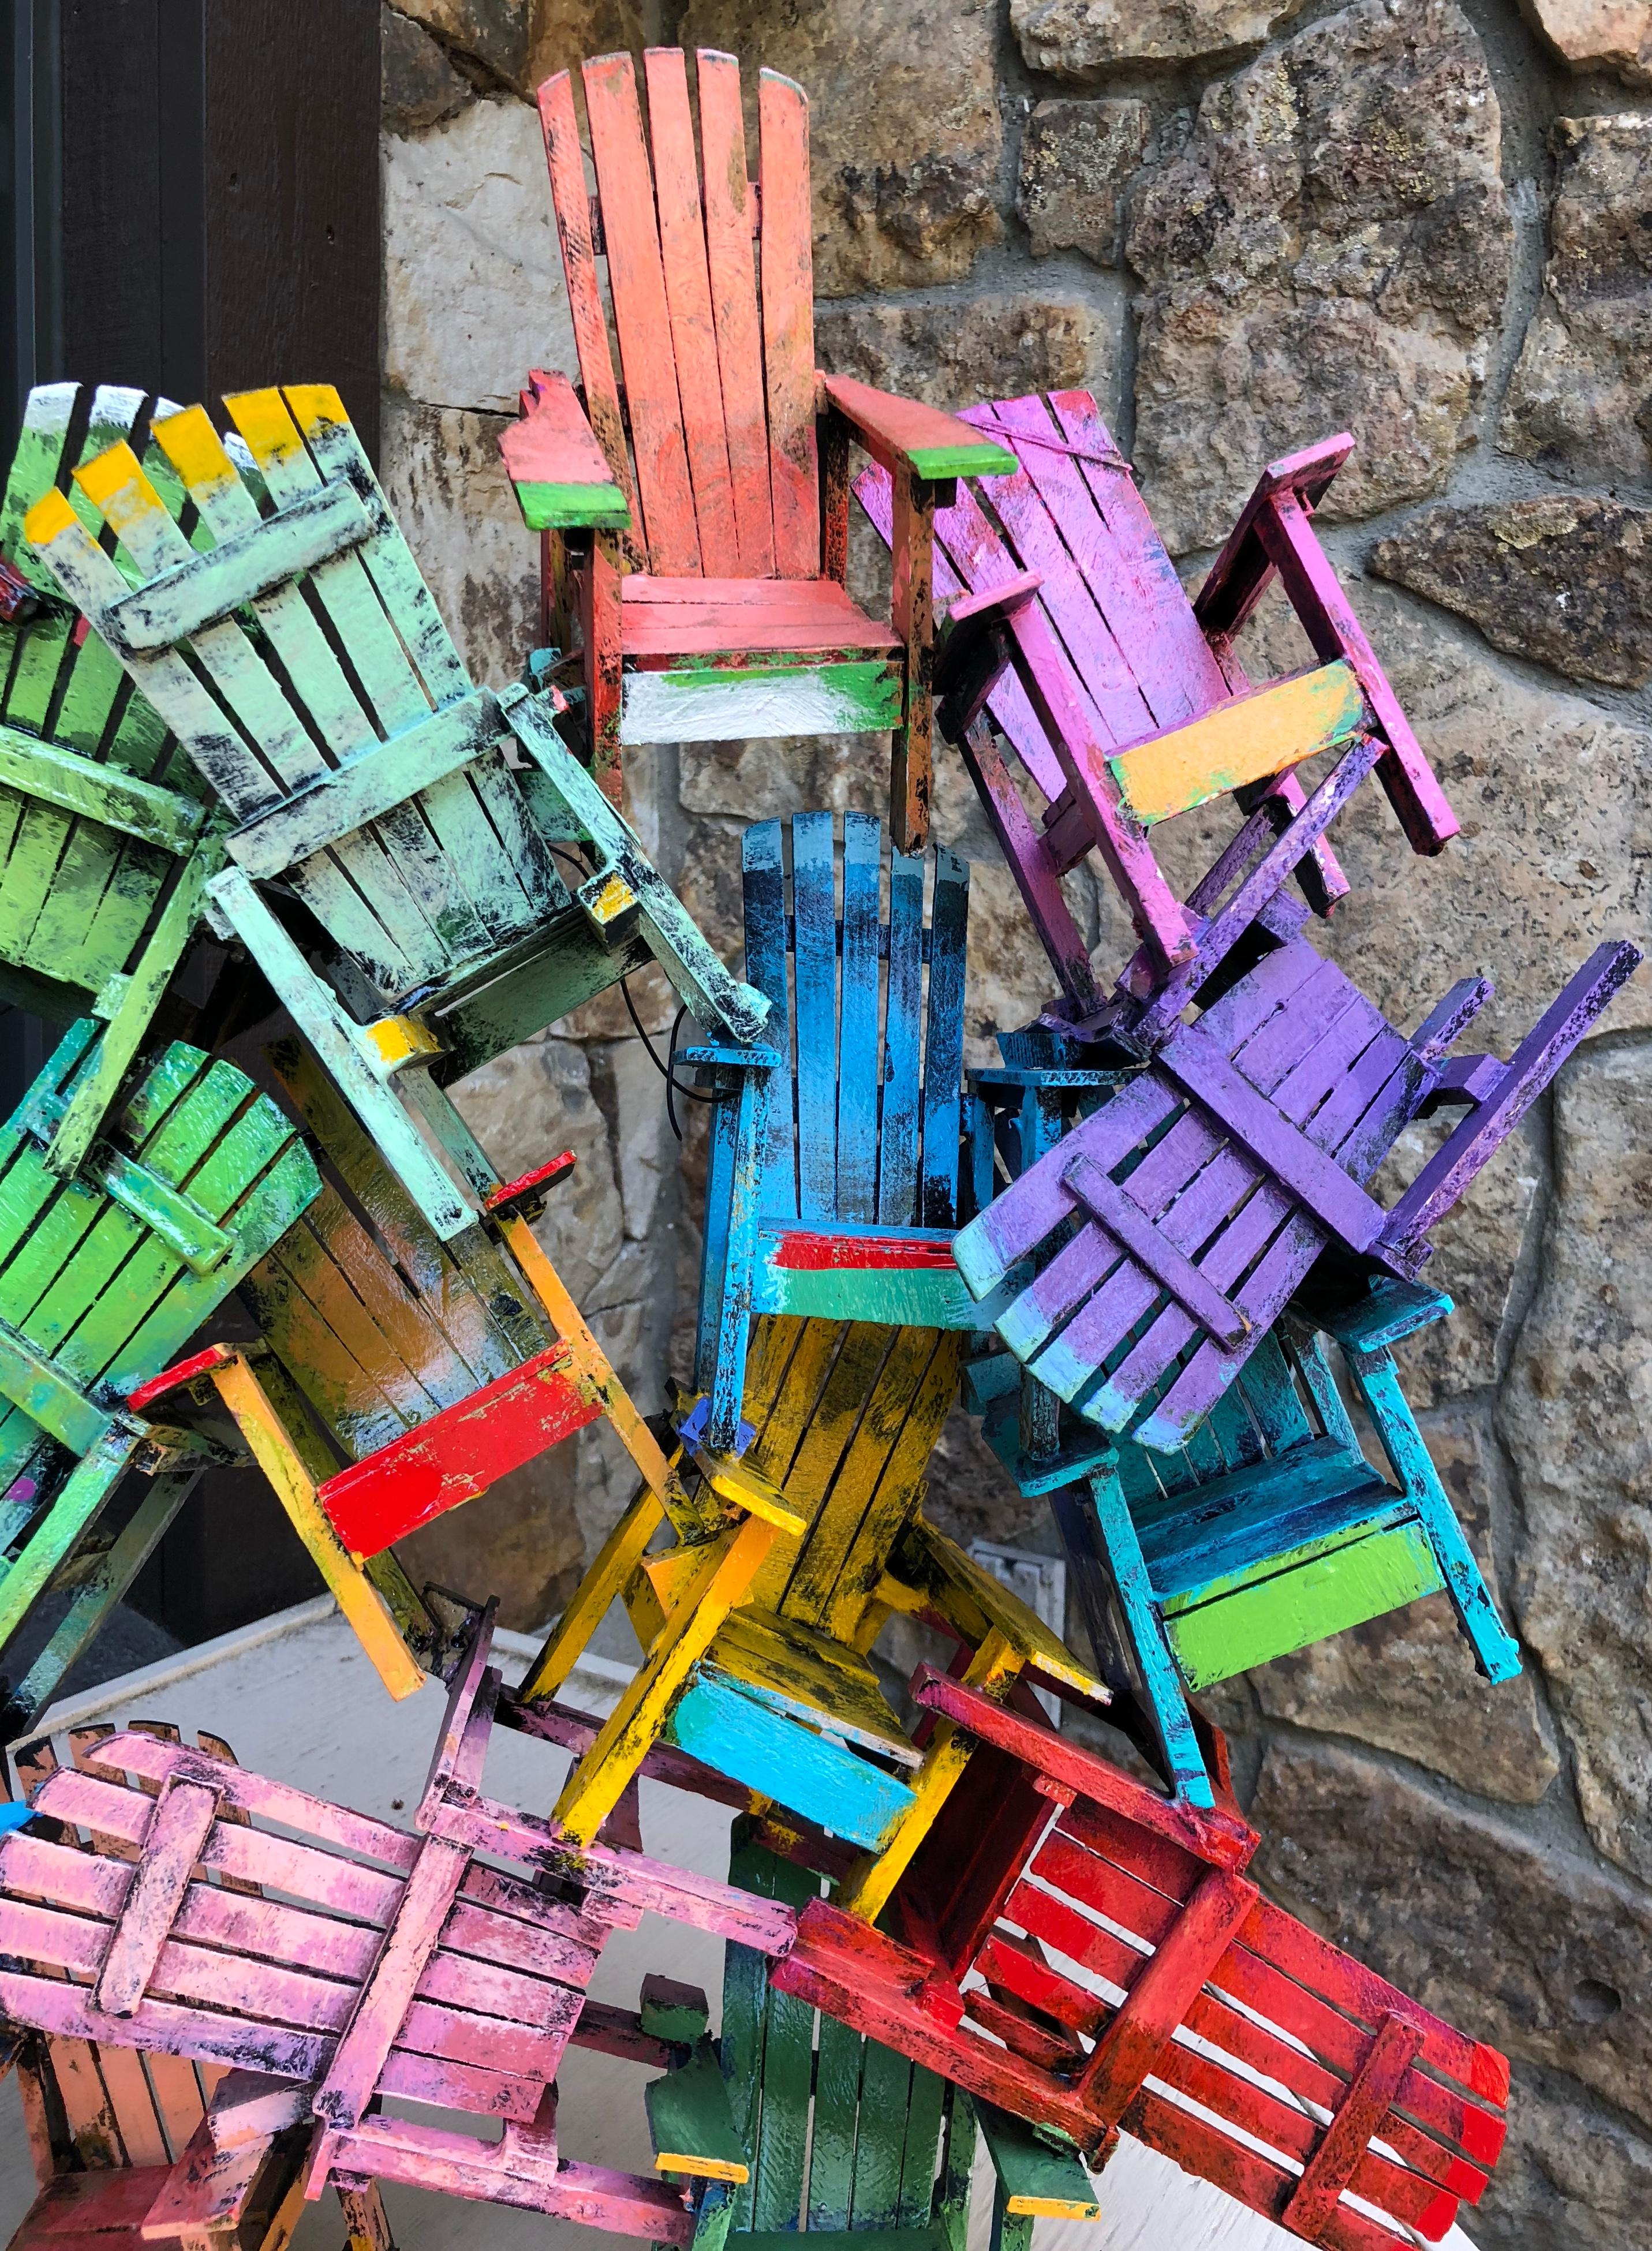 Paul Jacobsen uses everyday objects, such as chairs, cars, airplanes, trains, motorcycles and puzzles, all built from scratch, and turns them into haunting and very desirable works of art. Among his most famous works are the Adirondack chair series,